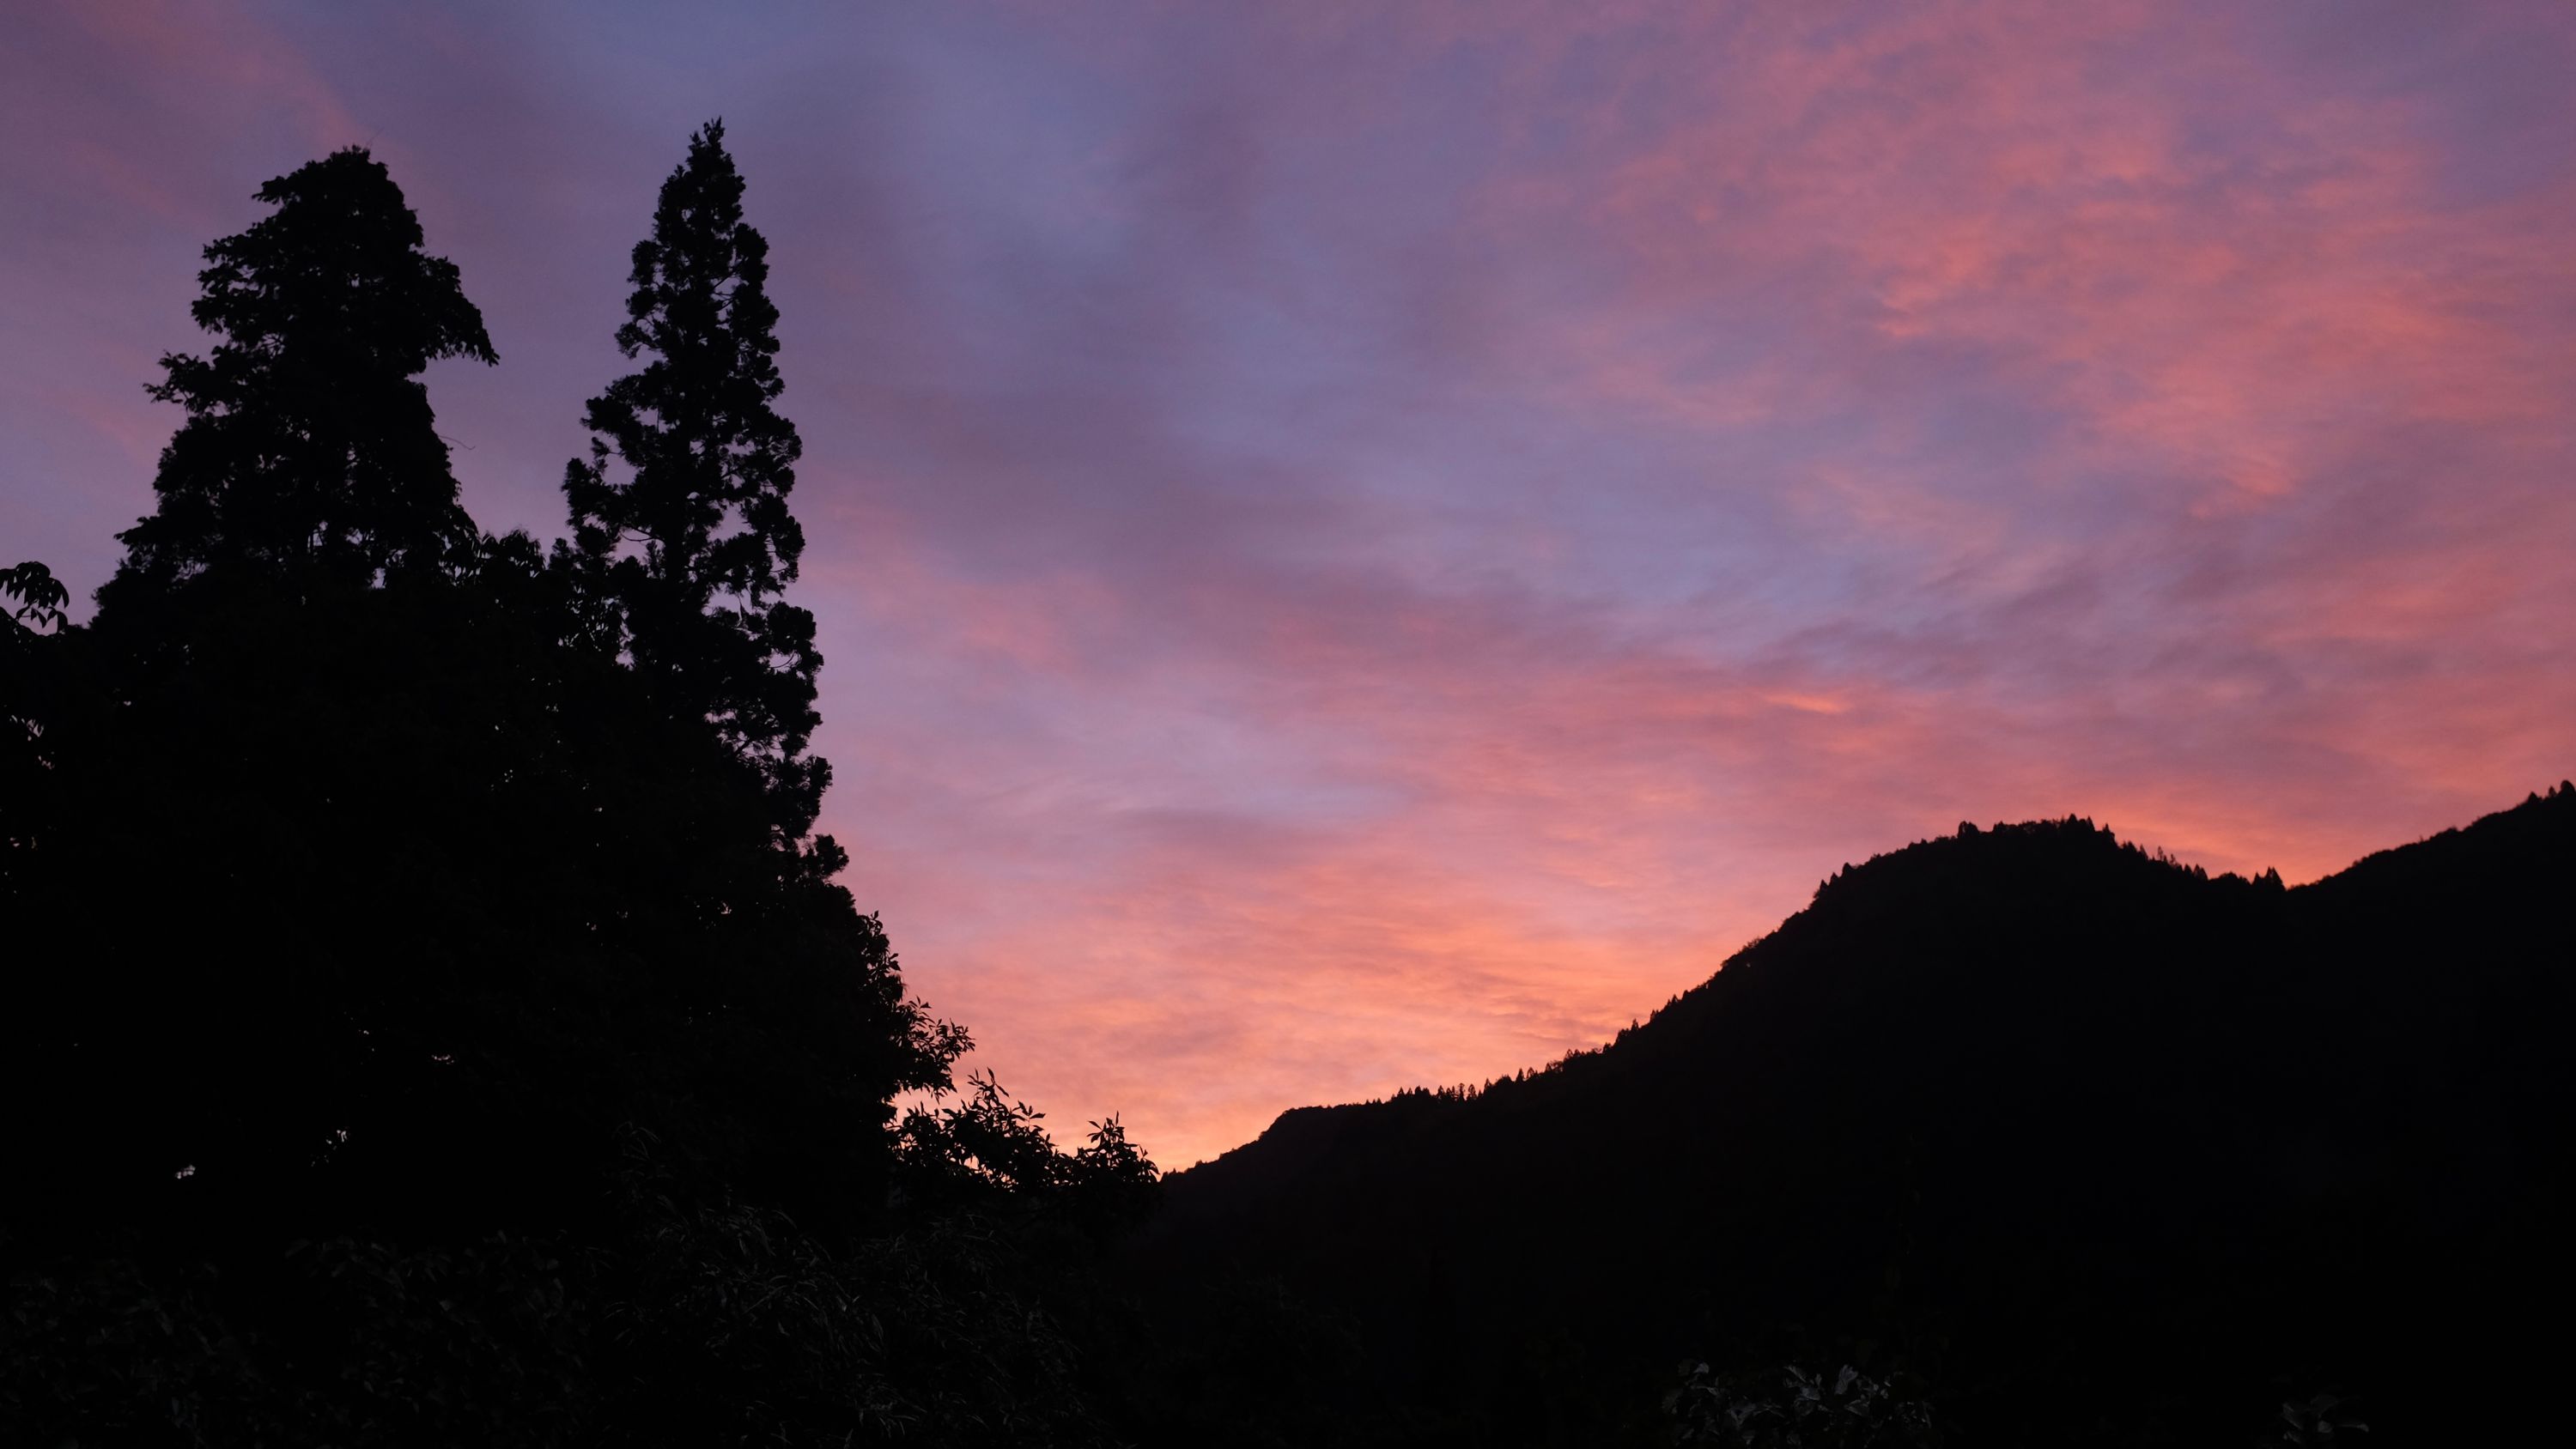 Dawn colors in the sky above a mountain forest.